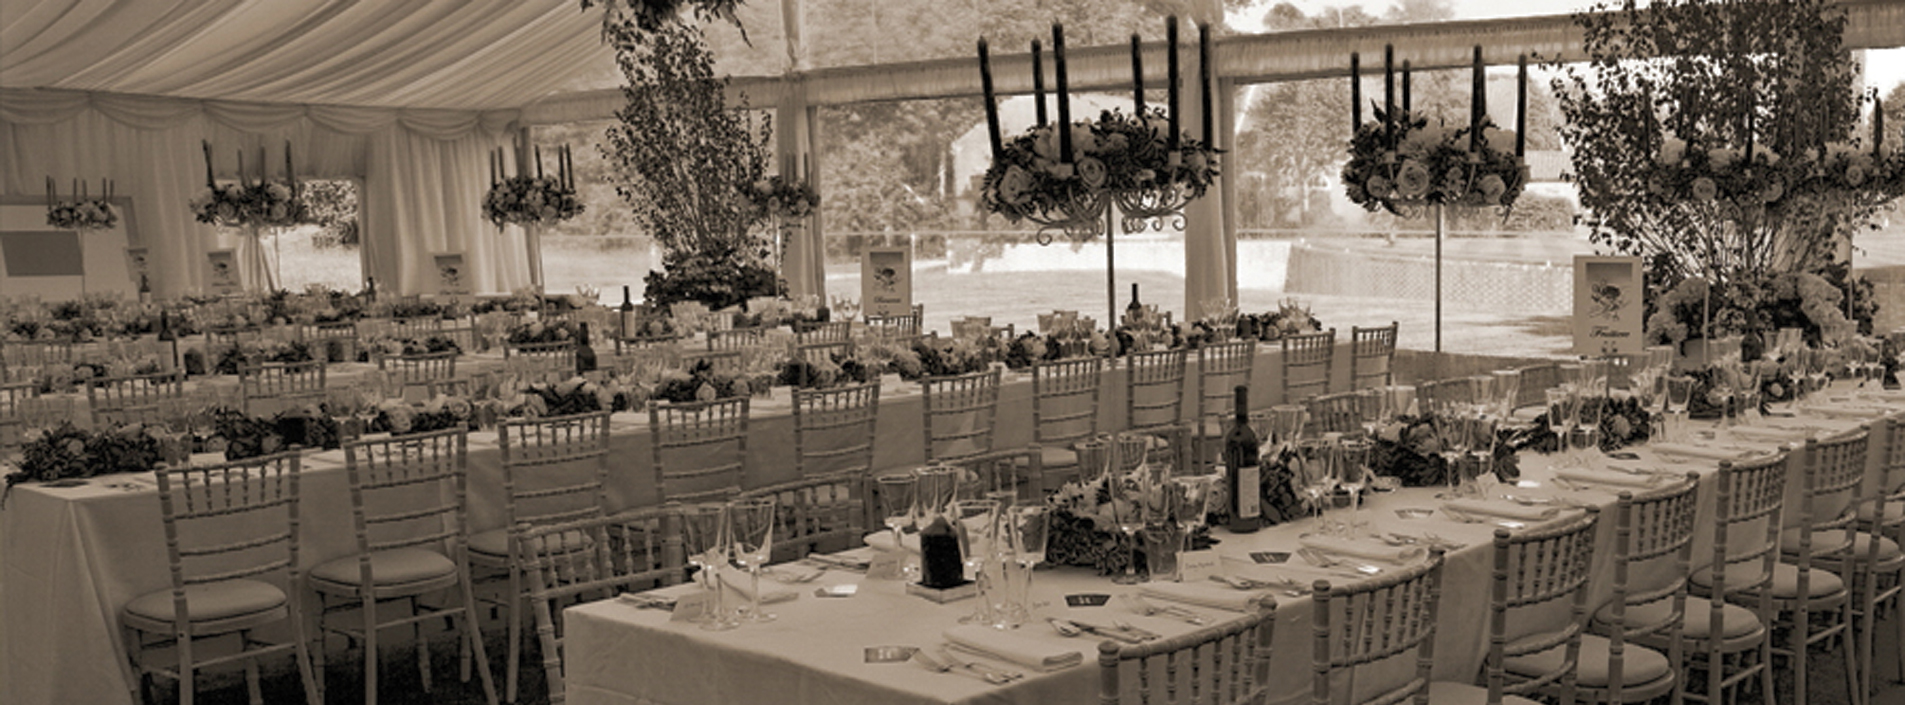 Chairs laid out in wedding marquee